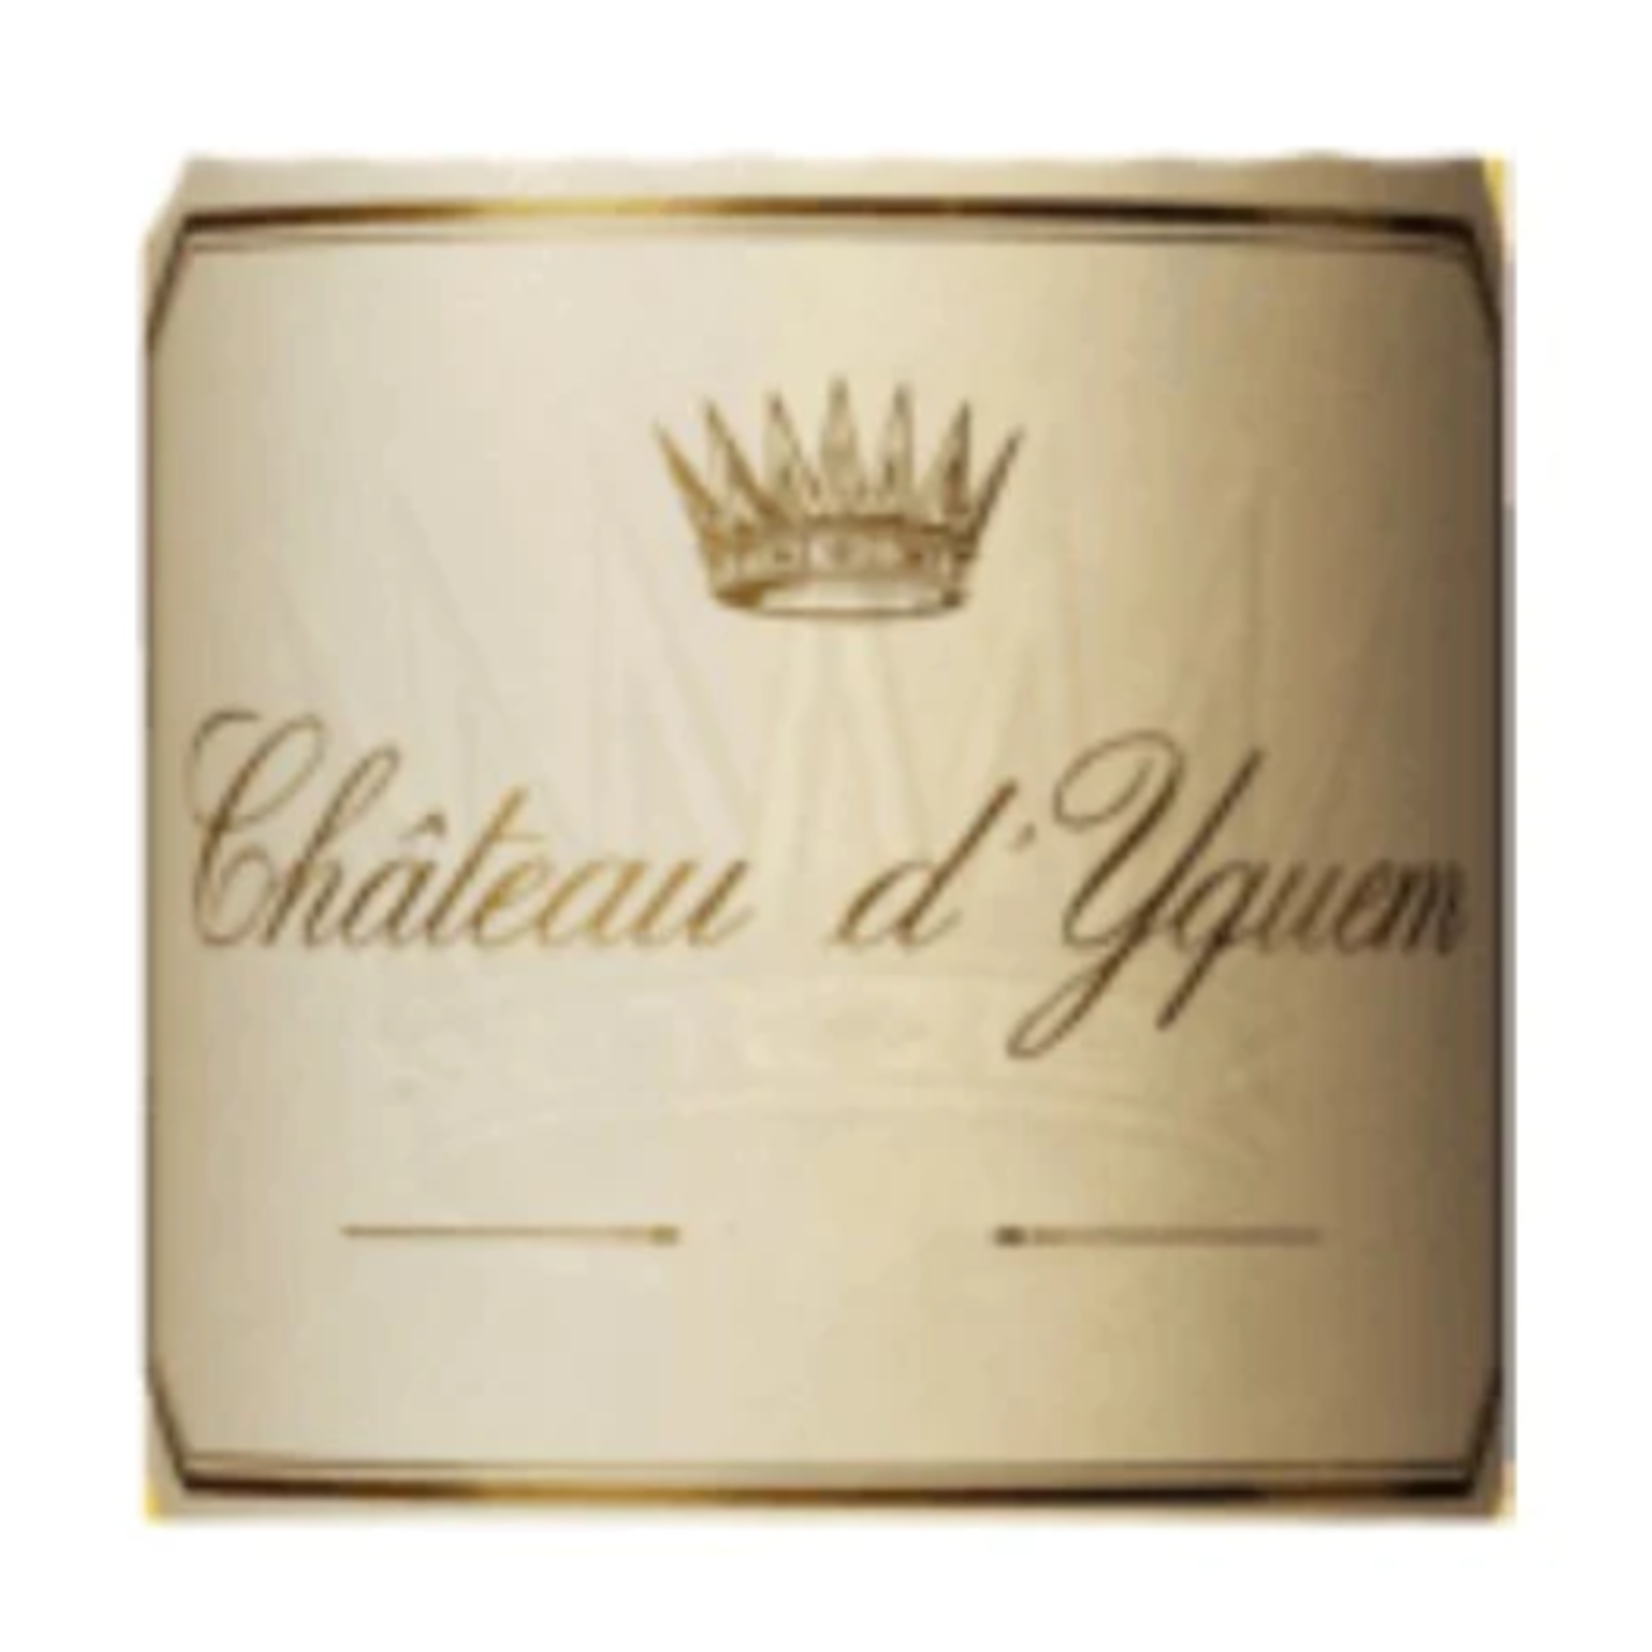 Wine Trust Chateau d'Yquem 375 ml, France